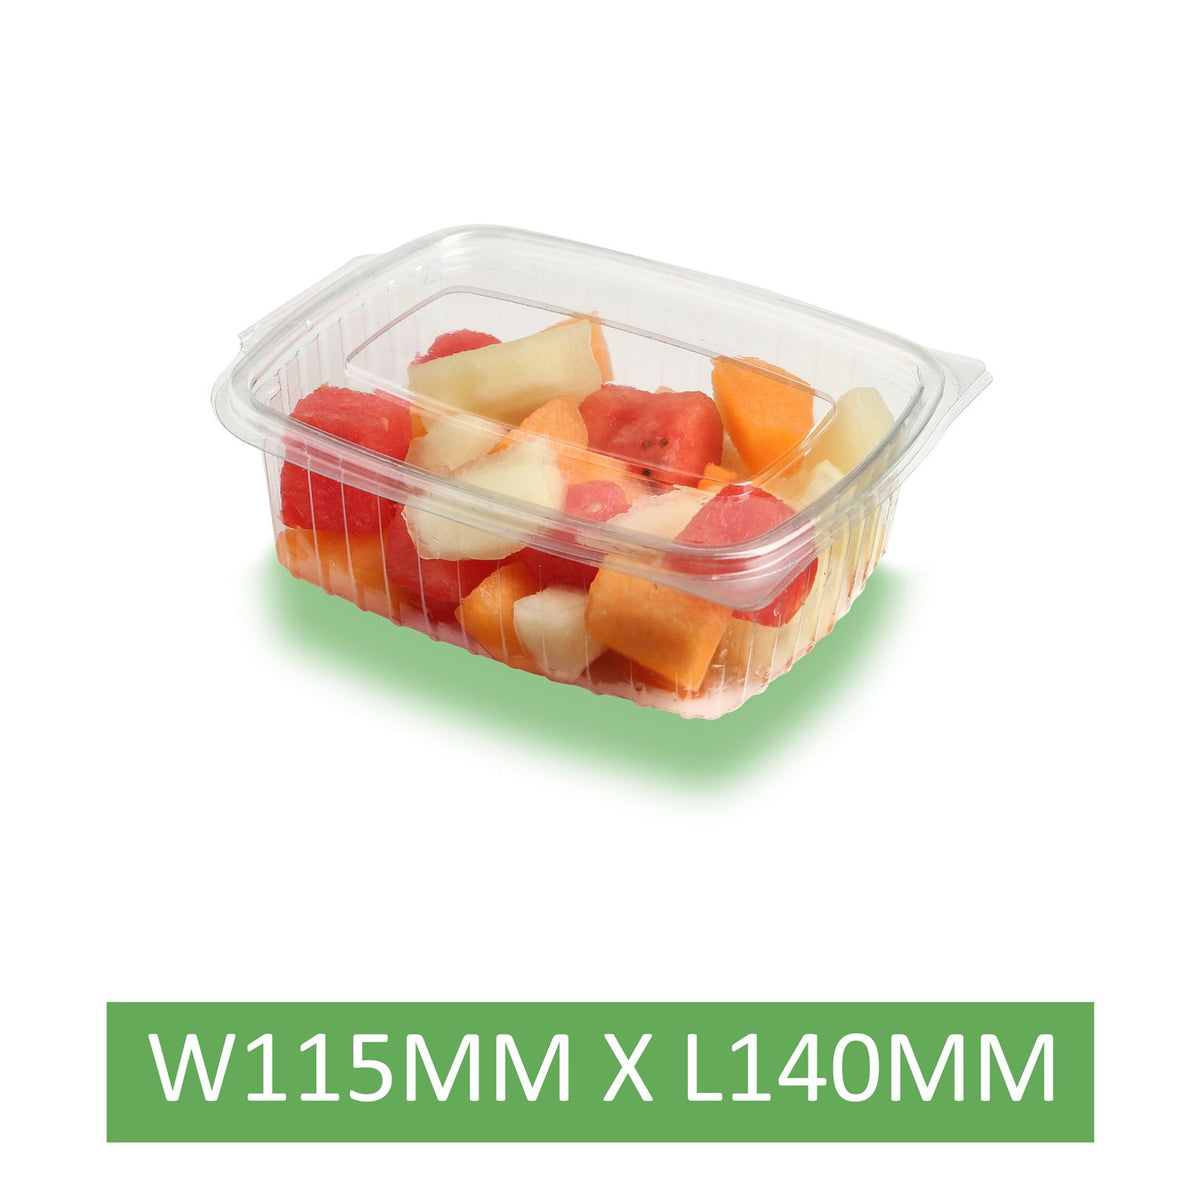 100 x 750cc Clear Cold Food/Salad/Cake Container With Hinged Lid (170mm x 135mm x 55mm) Recyclable rpet - Caterline -